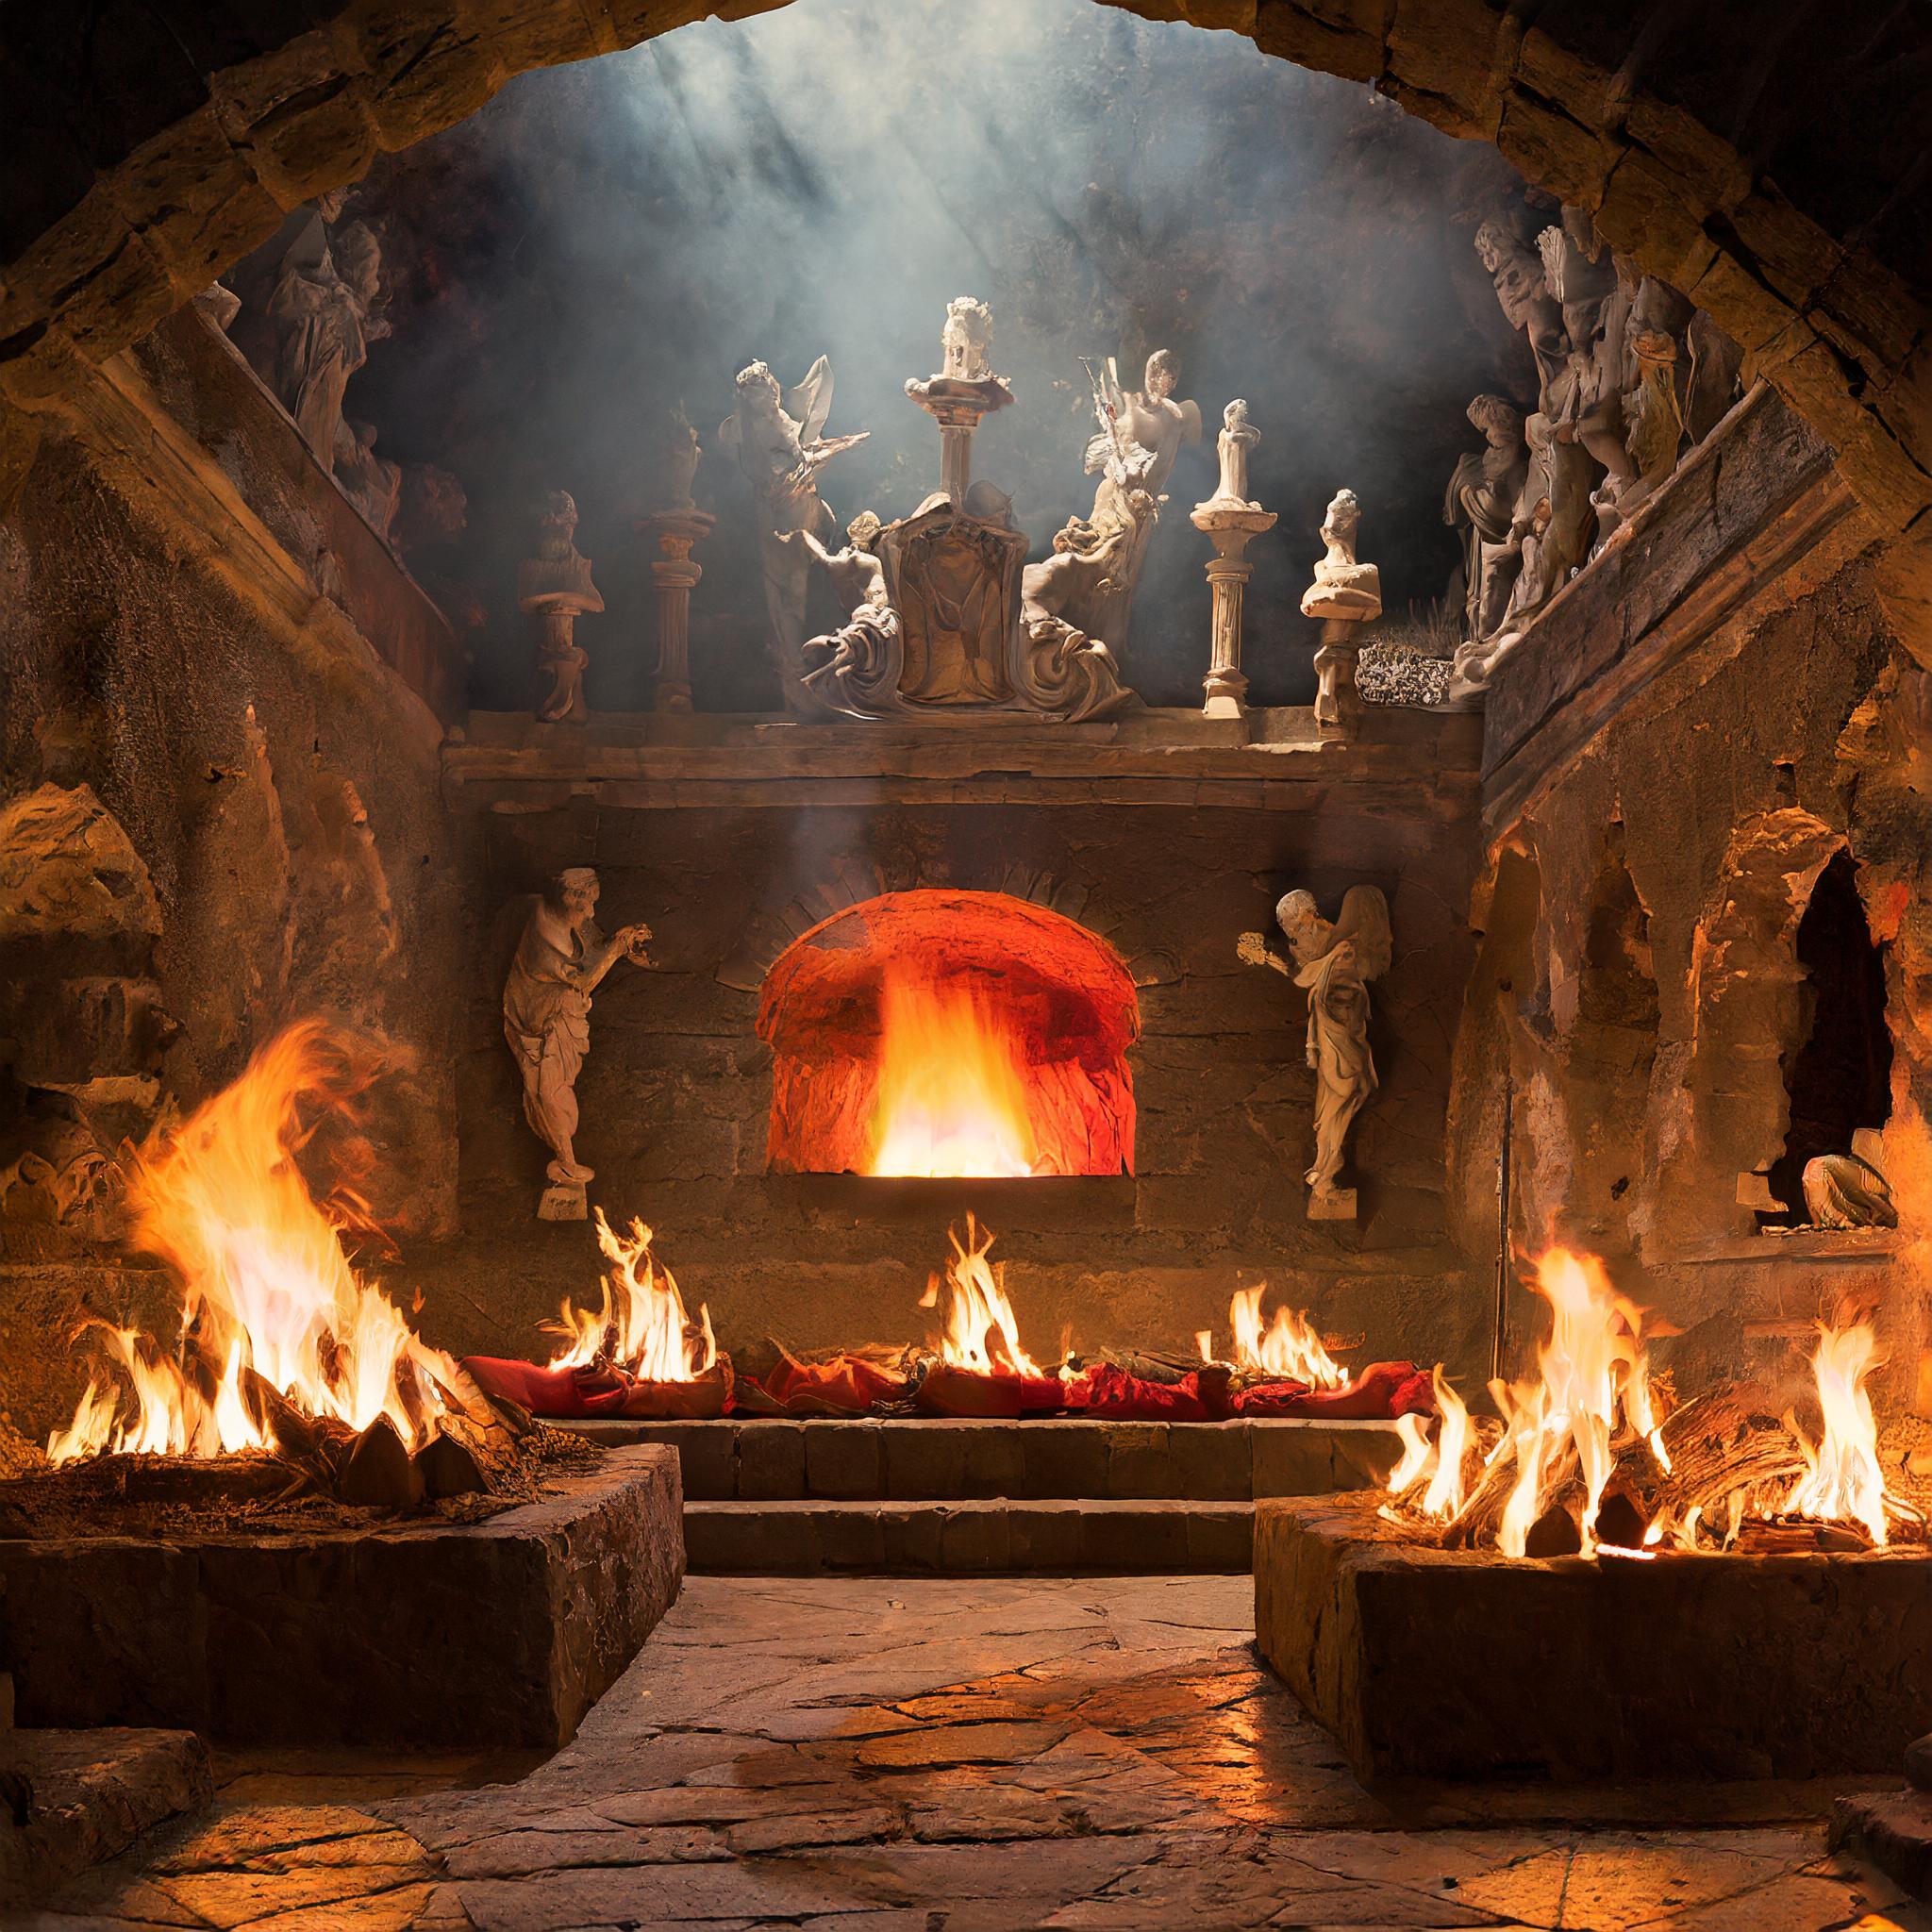 photo of a fire pit in hell with statues adorning the walls made of white stone.